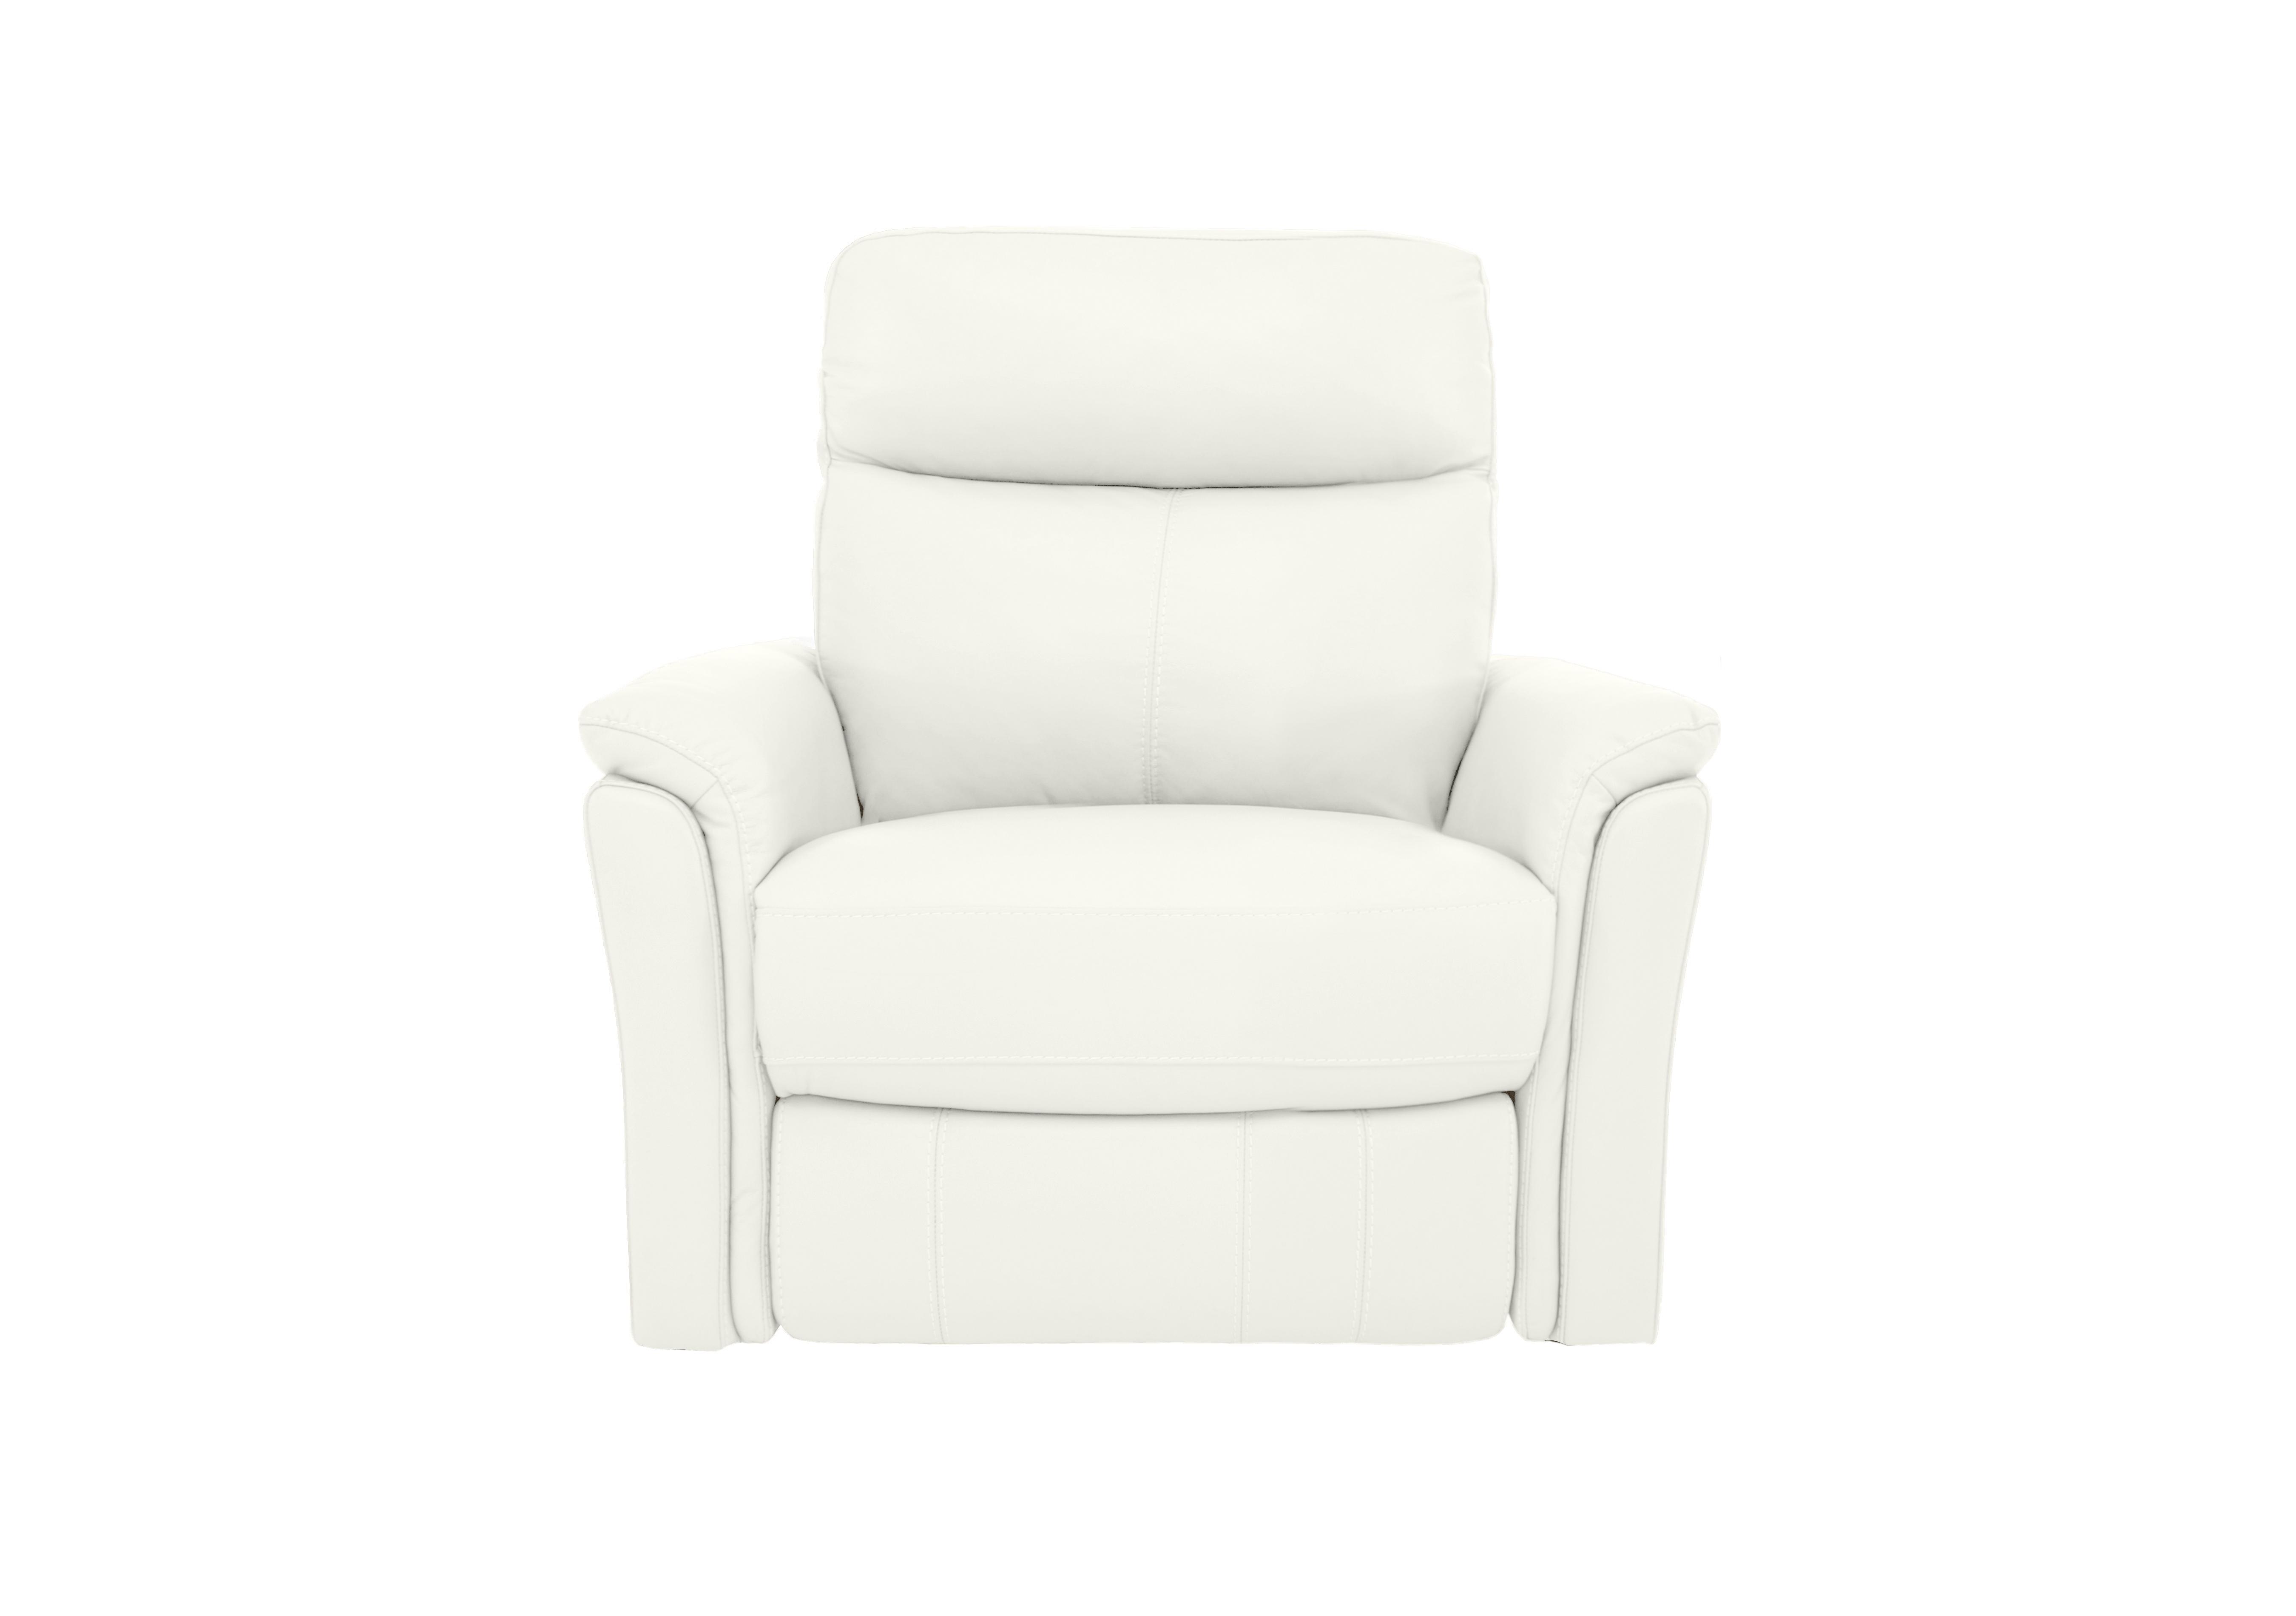 Compact Collection Piccolo Recliner Armchair in Bv-744d Star White on Furniture Village